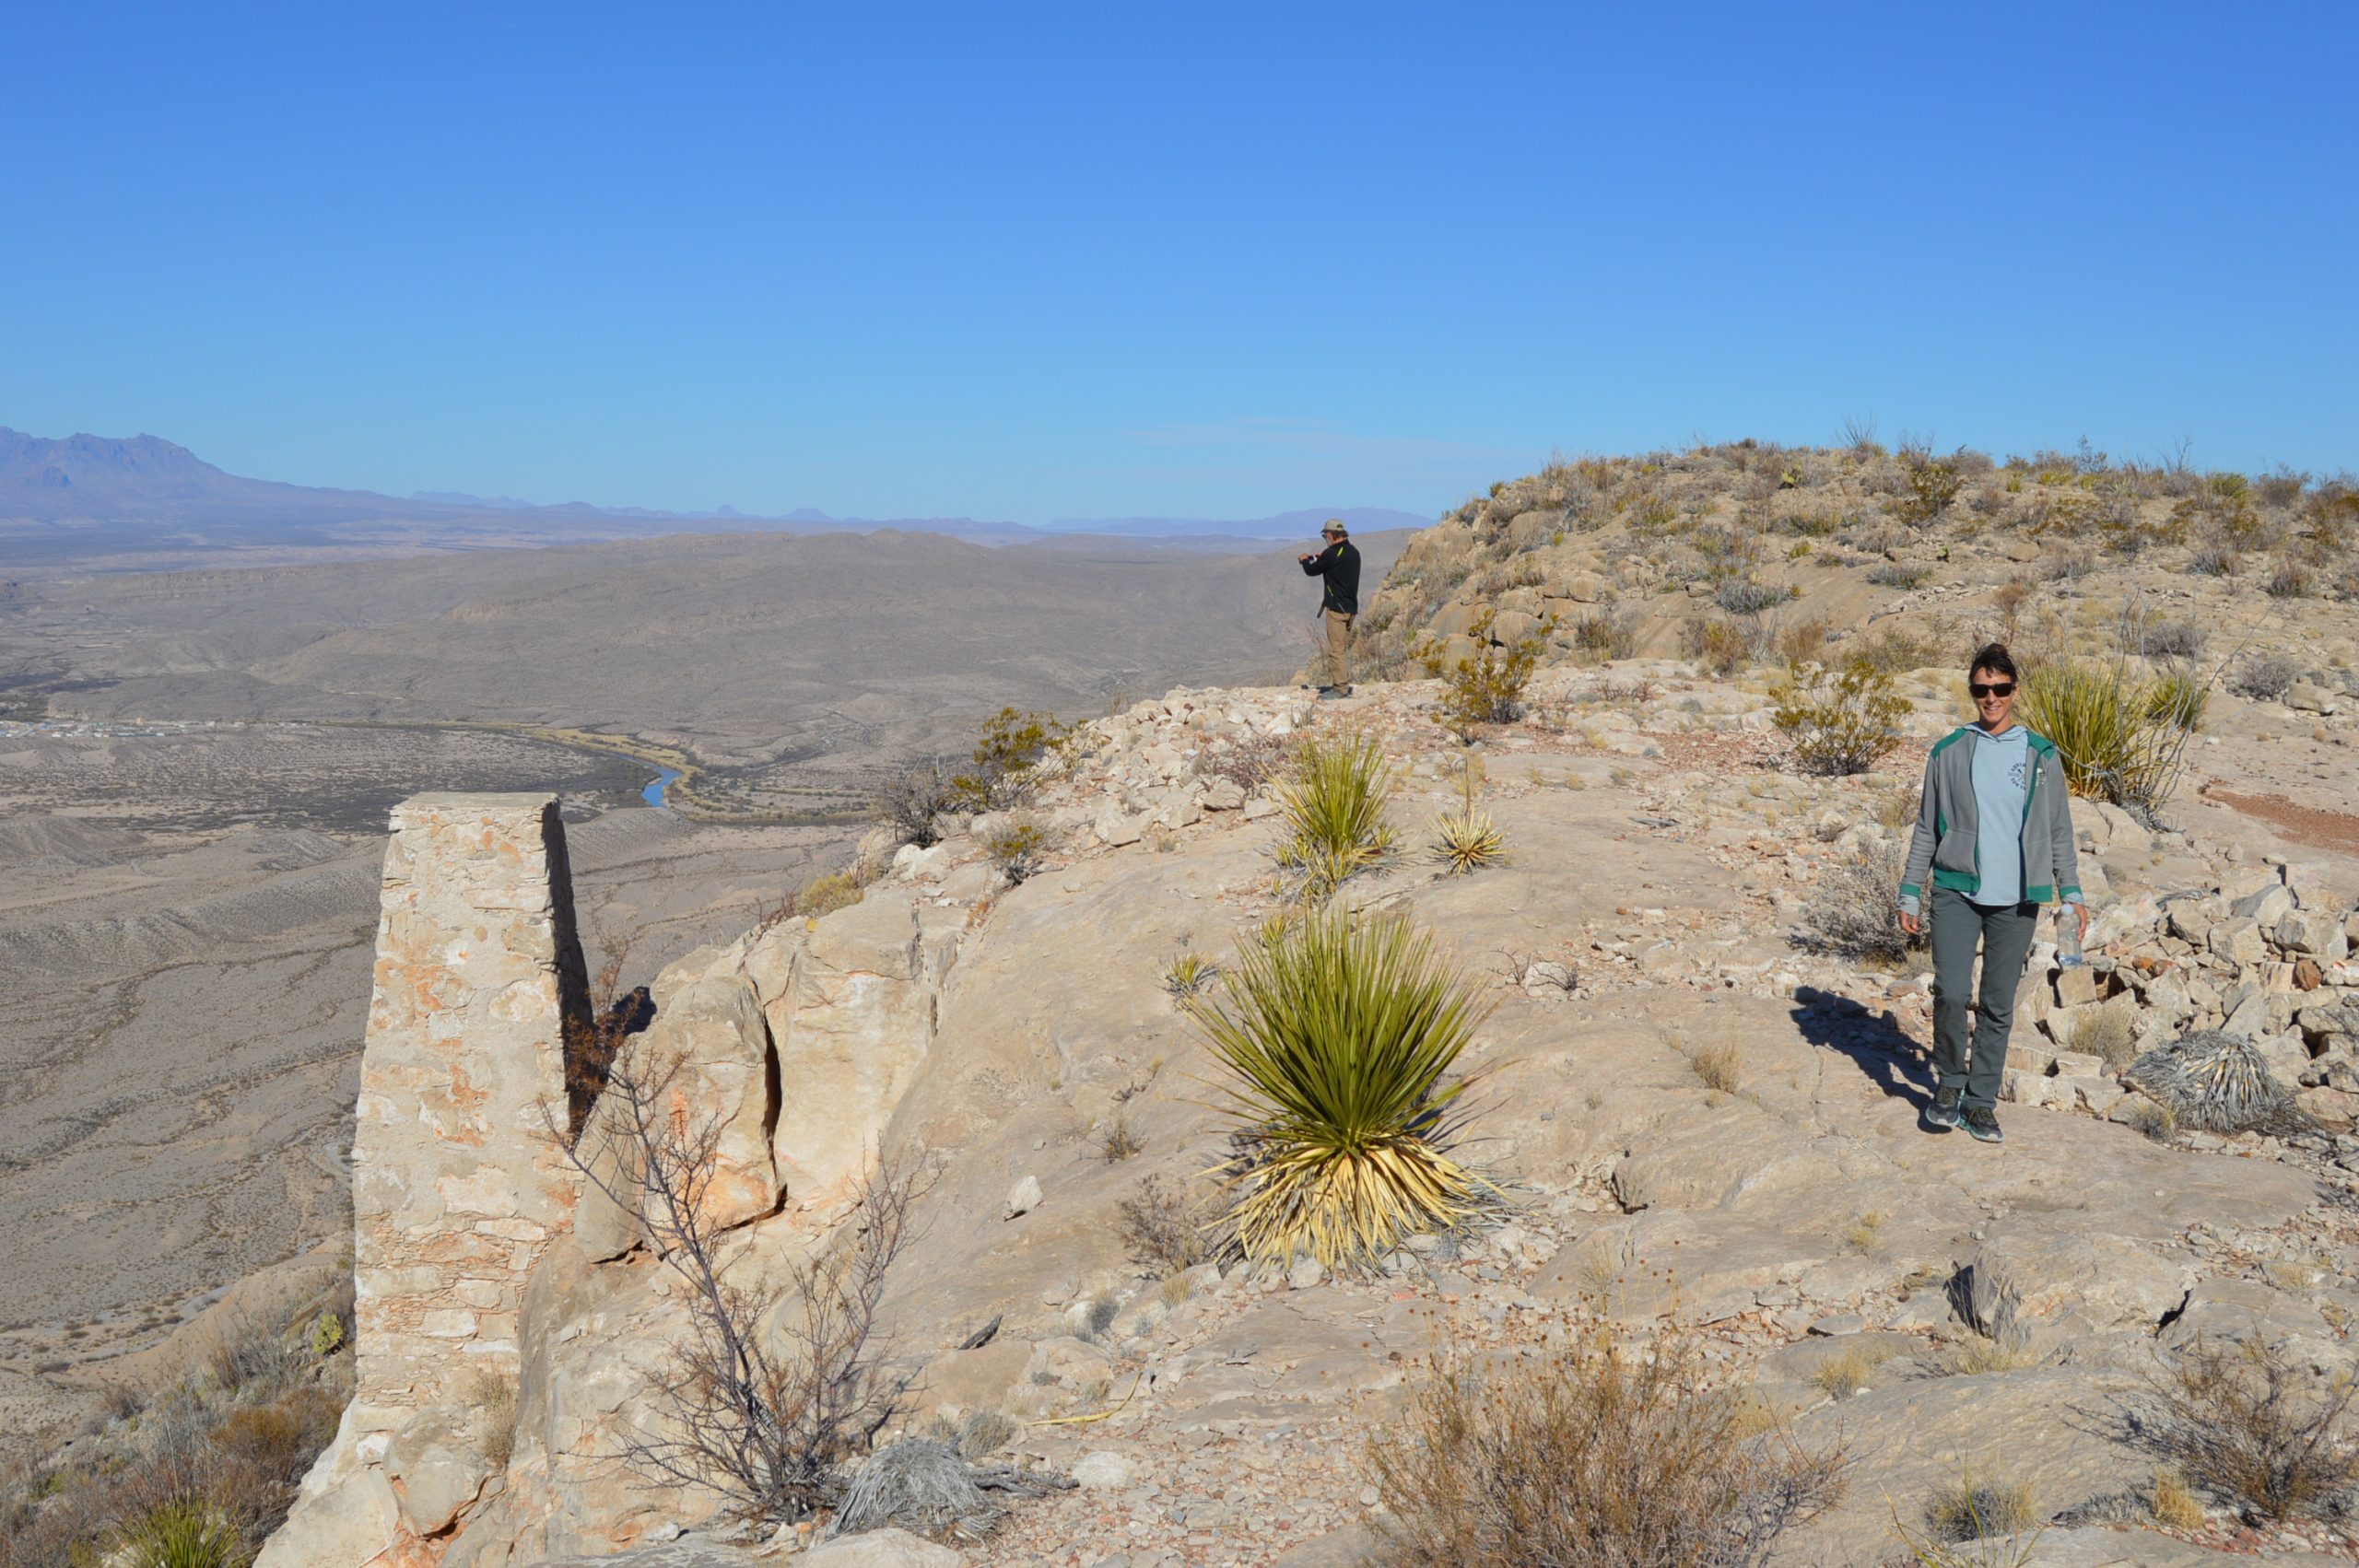 Hikers on a scenic overlook at El Terminal near Boquillas, Mexico